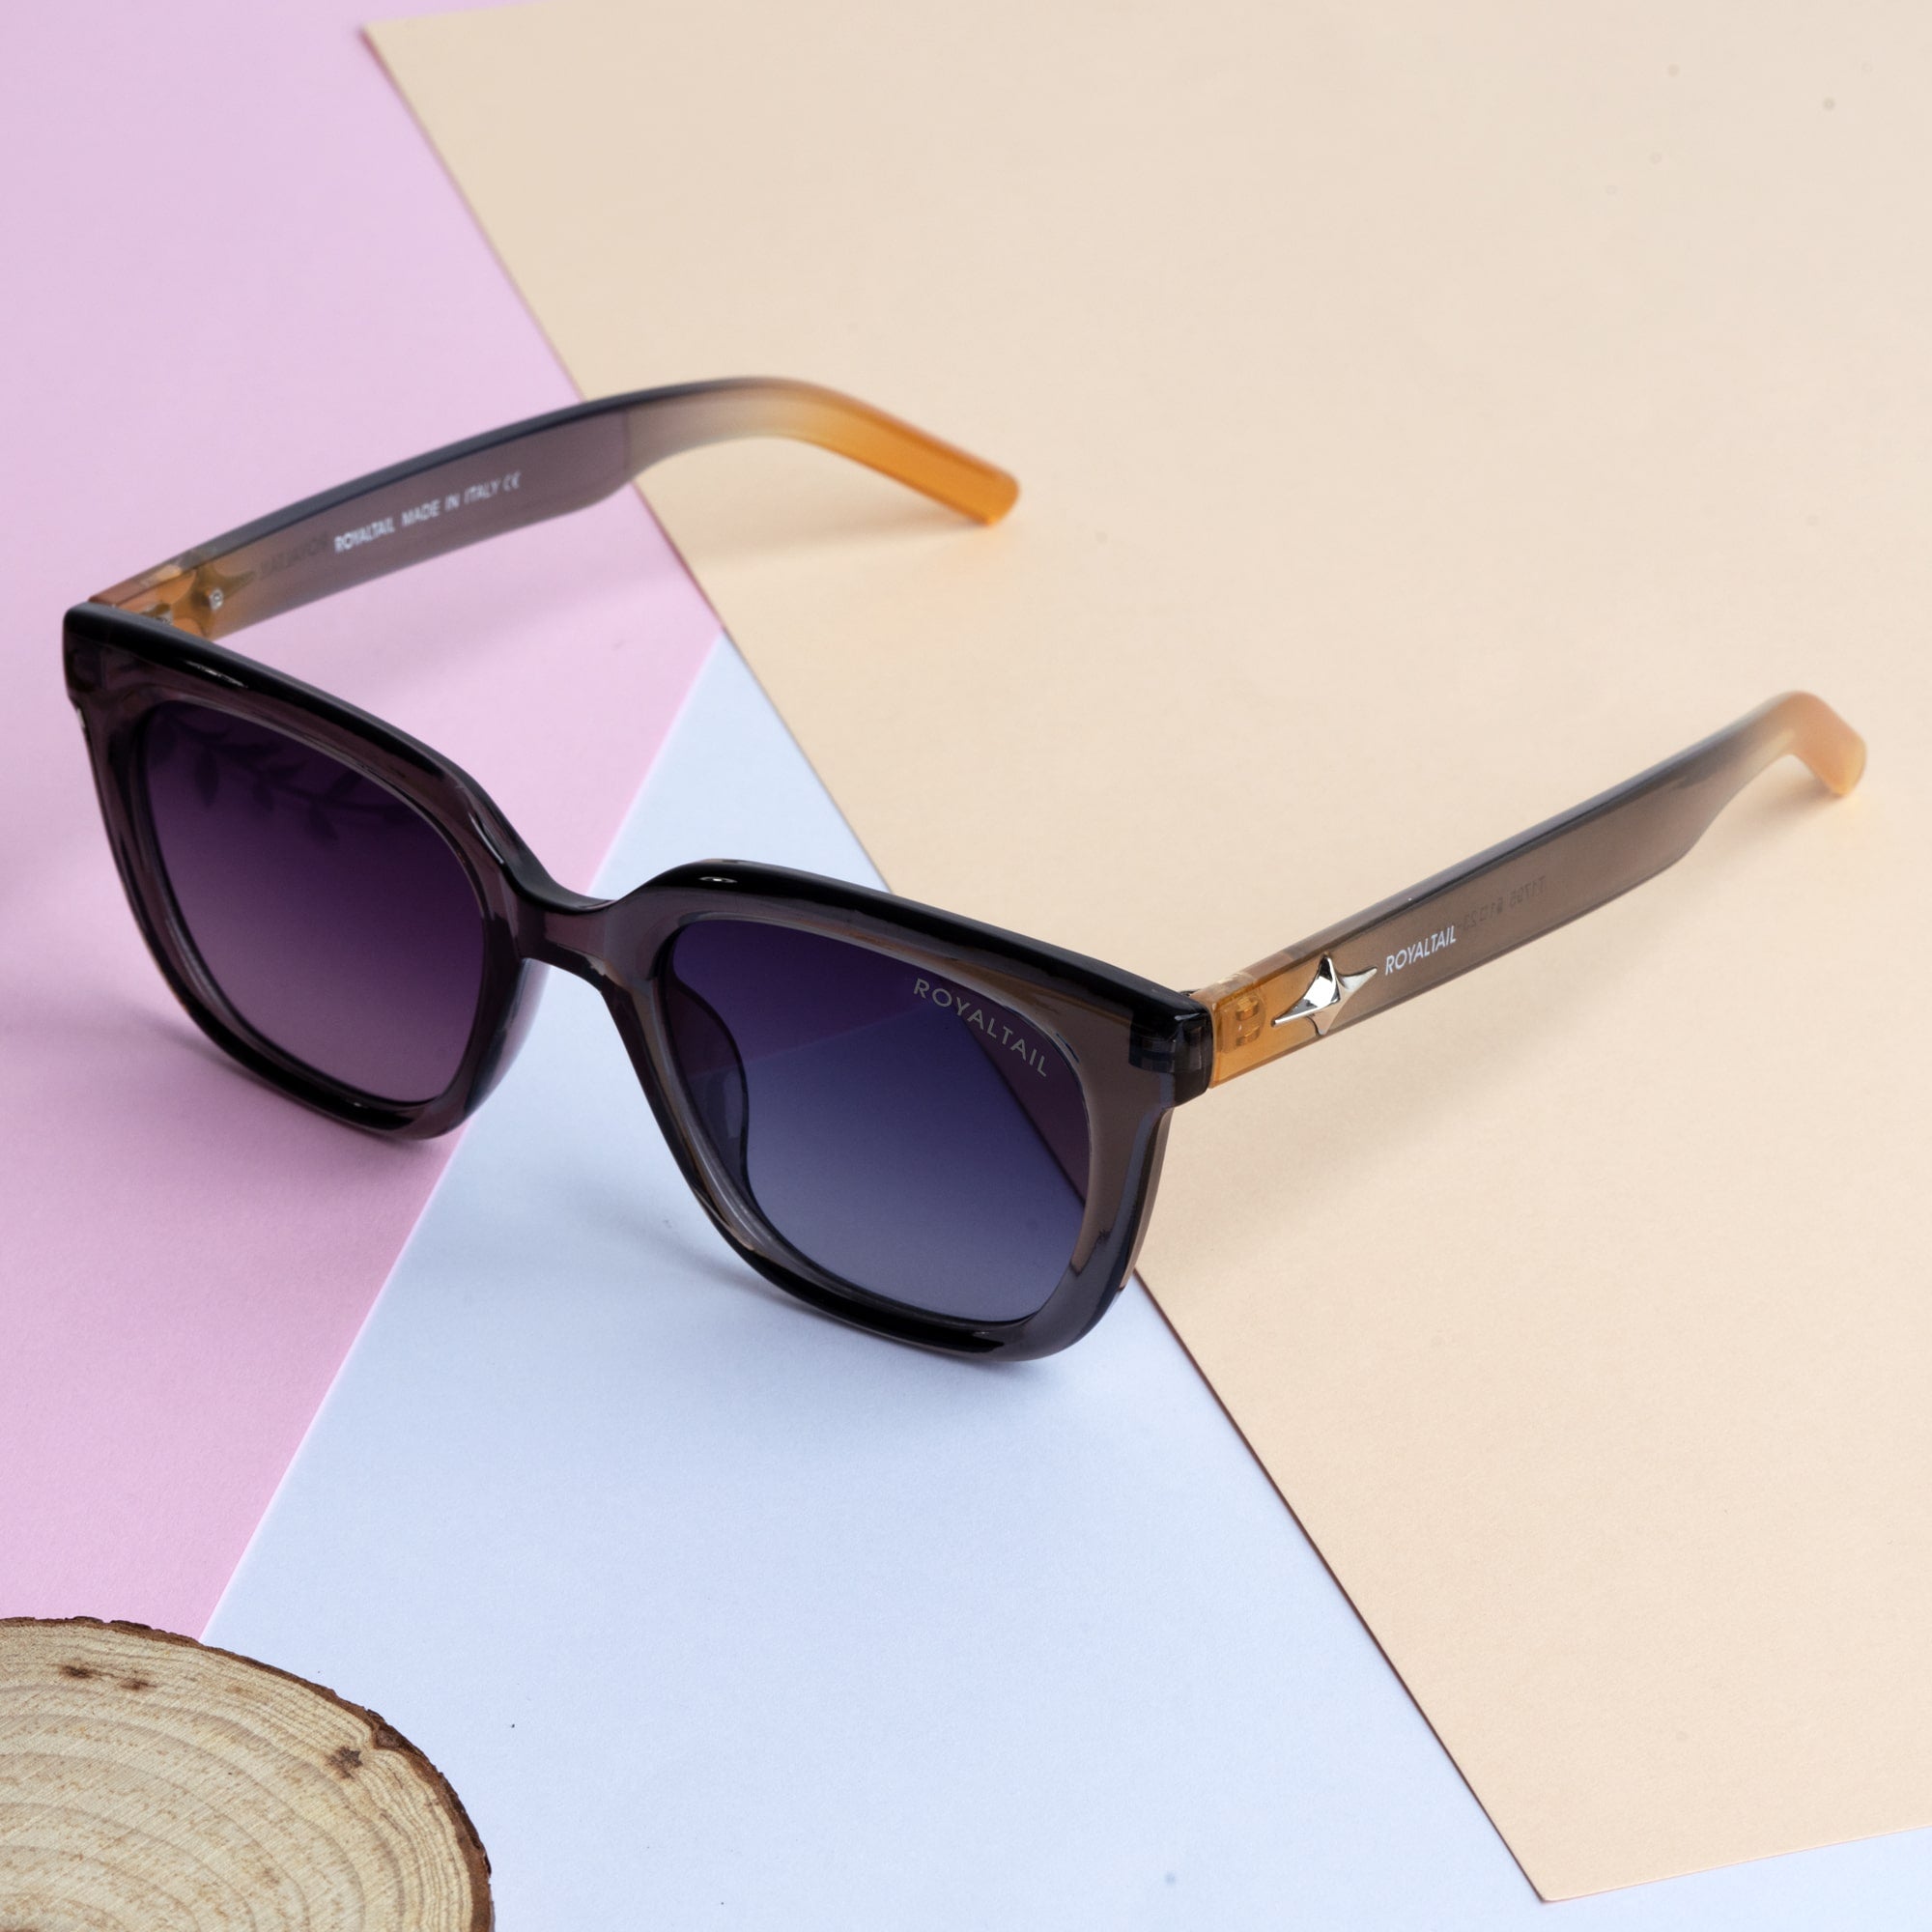 Retro Square Frame Dita Sunglasses Men For Men With UV 400 Lens And Big  Legs Fashionable Eyewear For Outdoor Pop Style From Joesun, $45.77 |  DHgate.Com